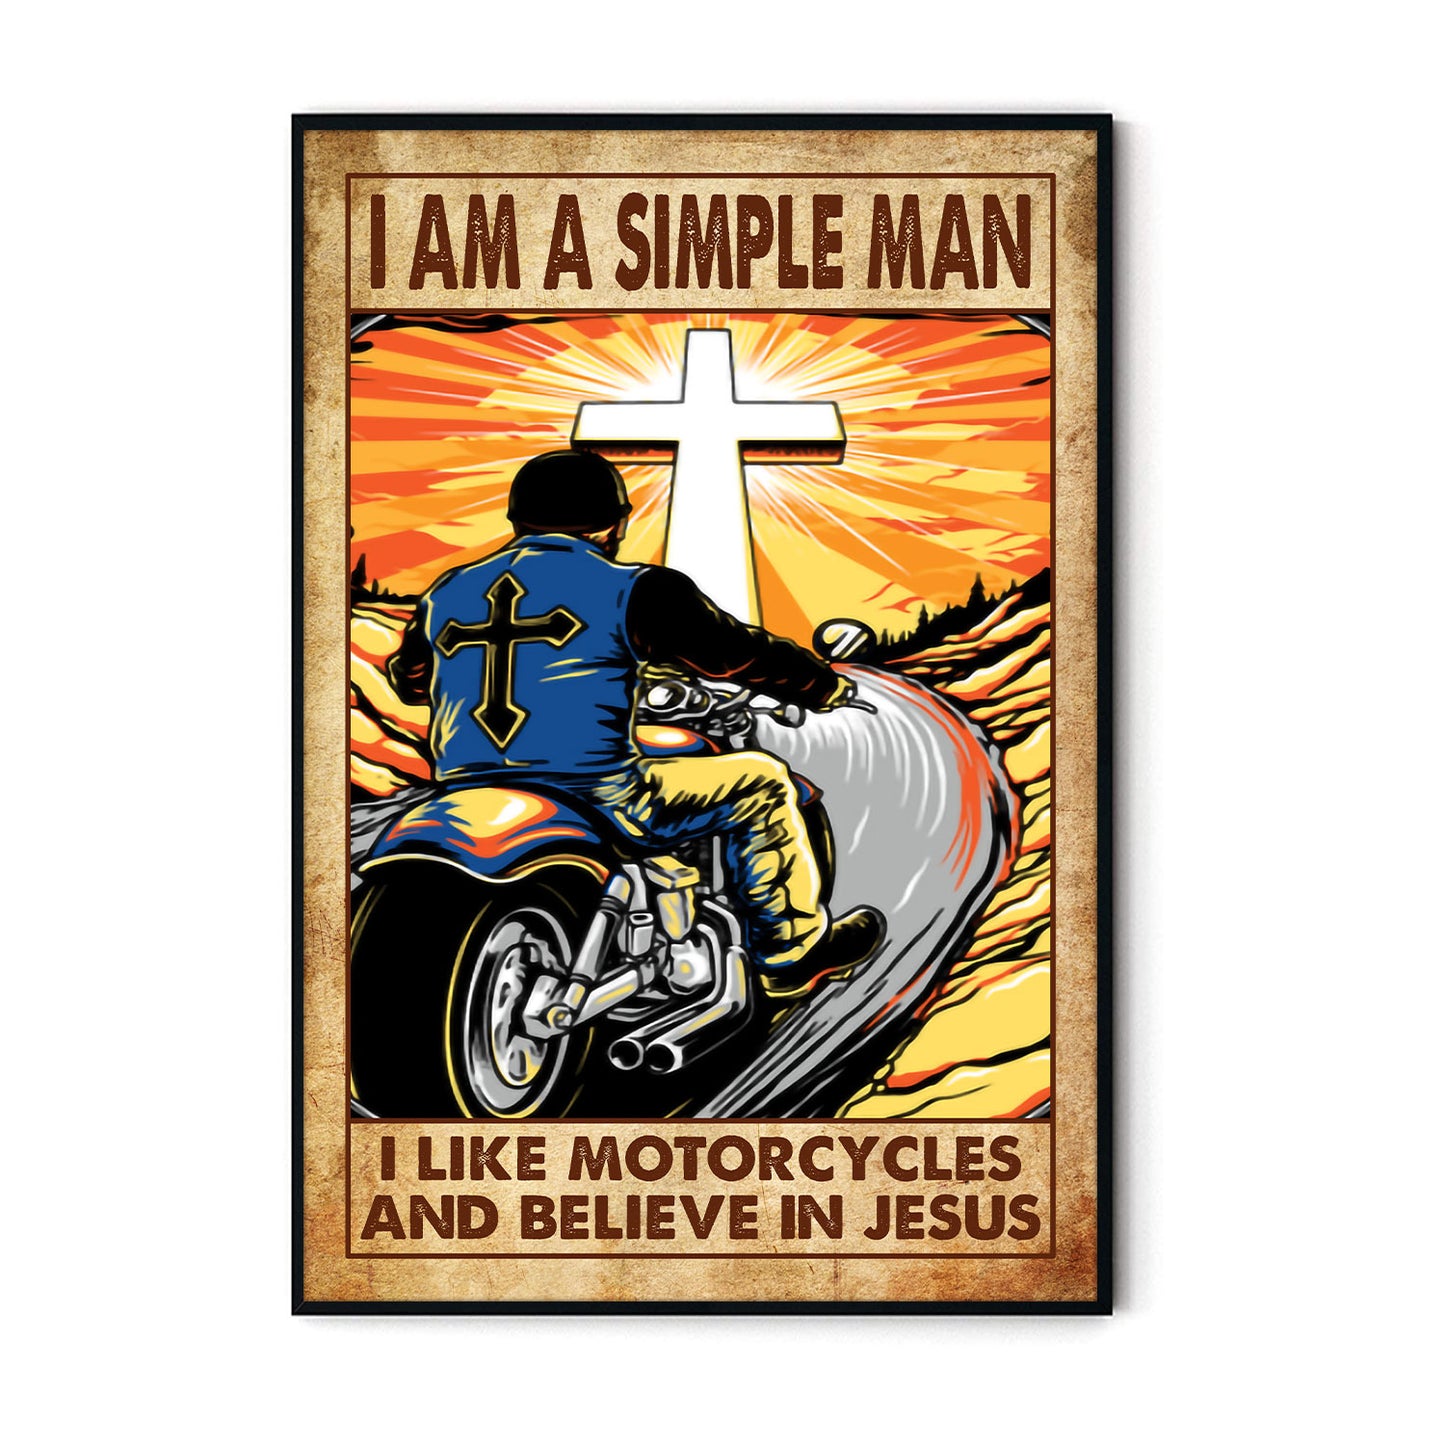 Wanderlust I Am A Simple Man Jesus Personalizedwitch Poster